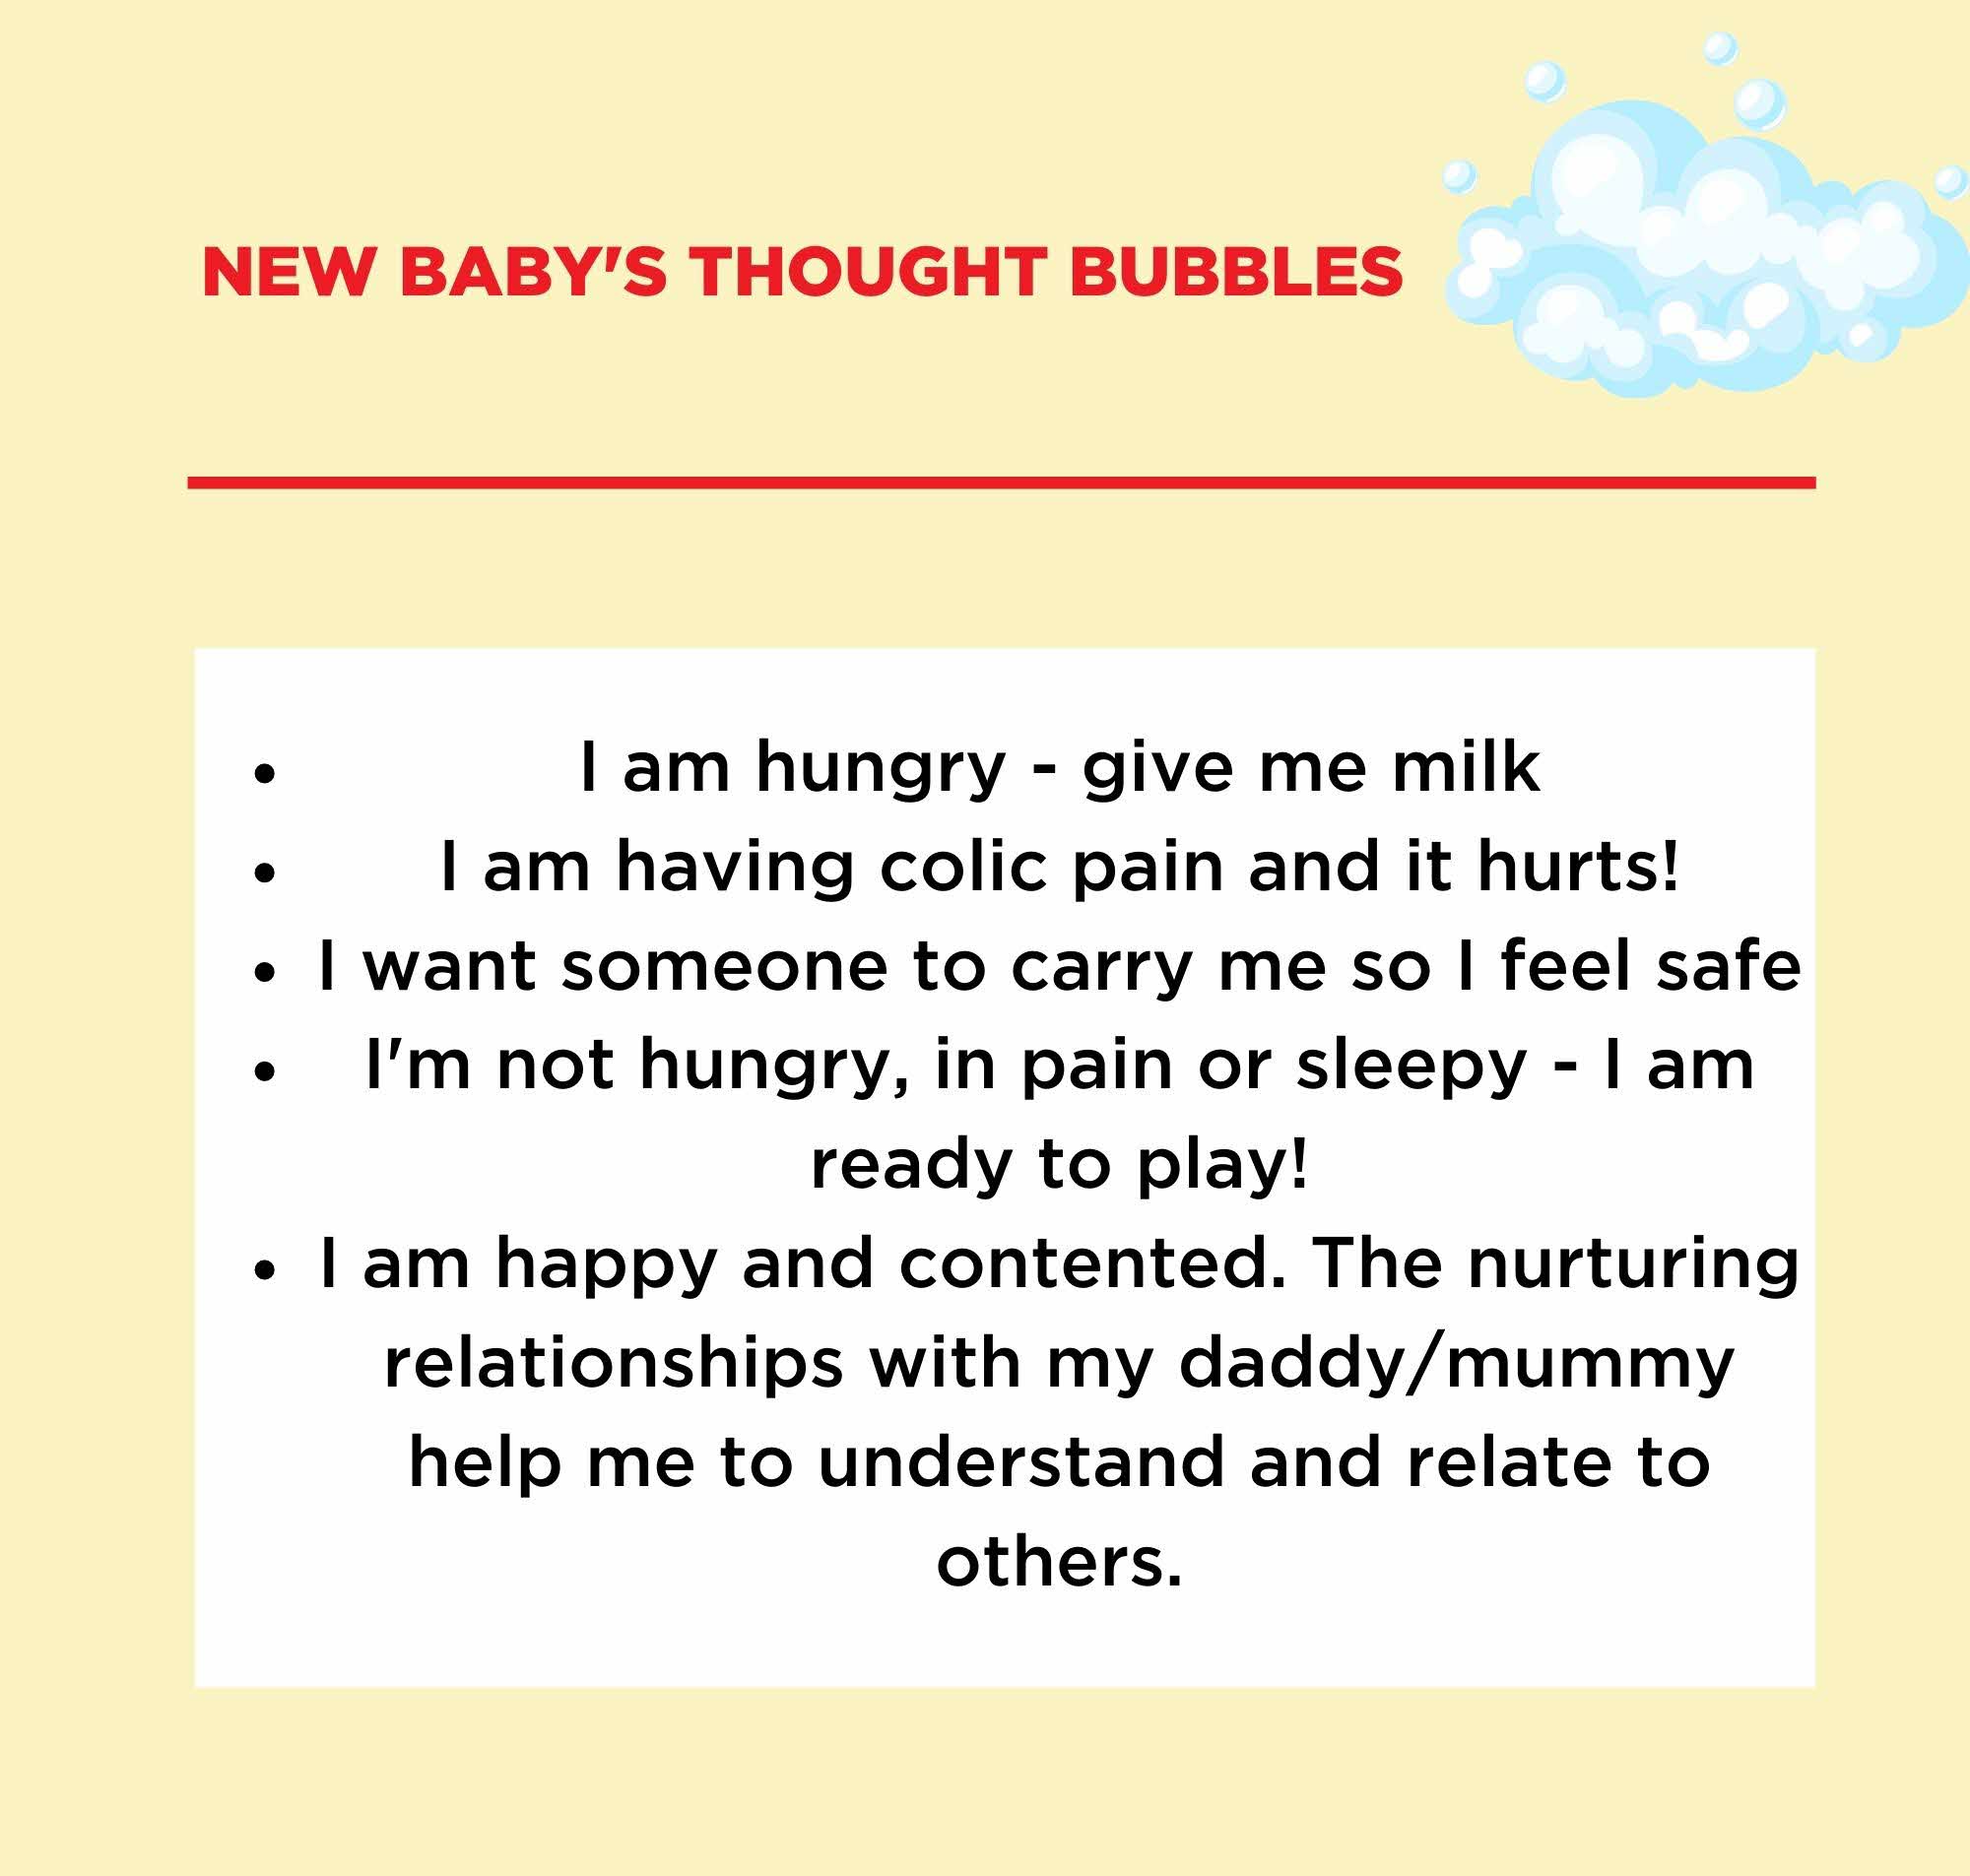 New Baby's Thought Bubbles